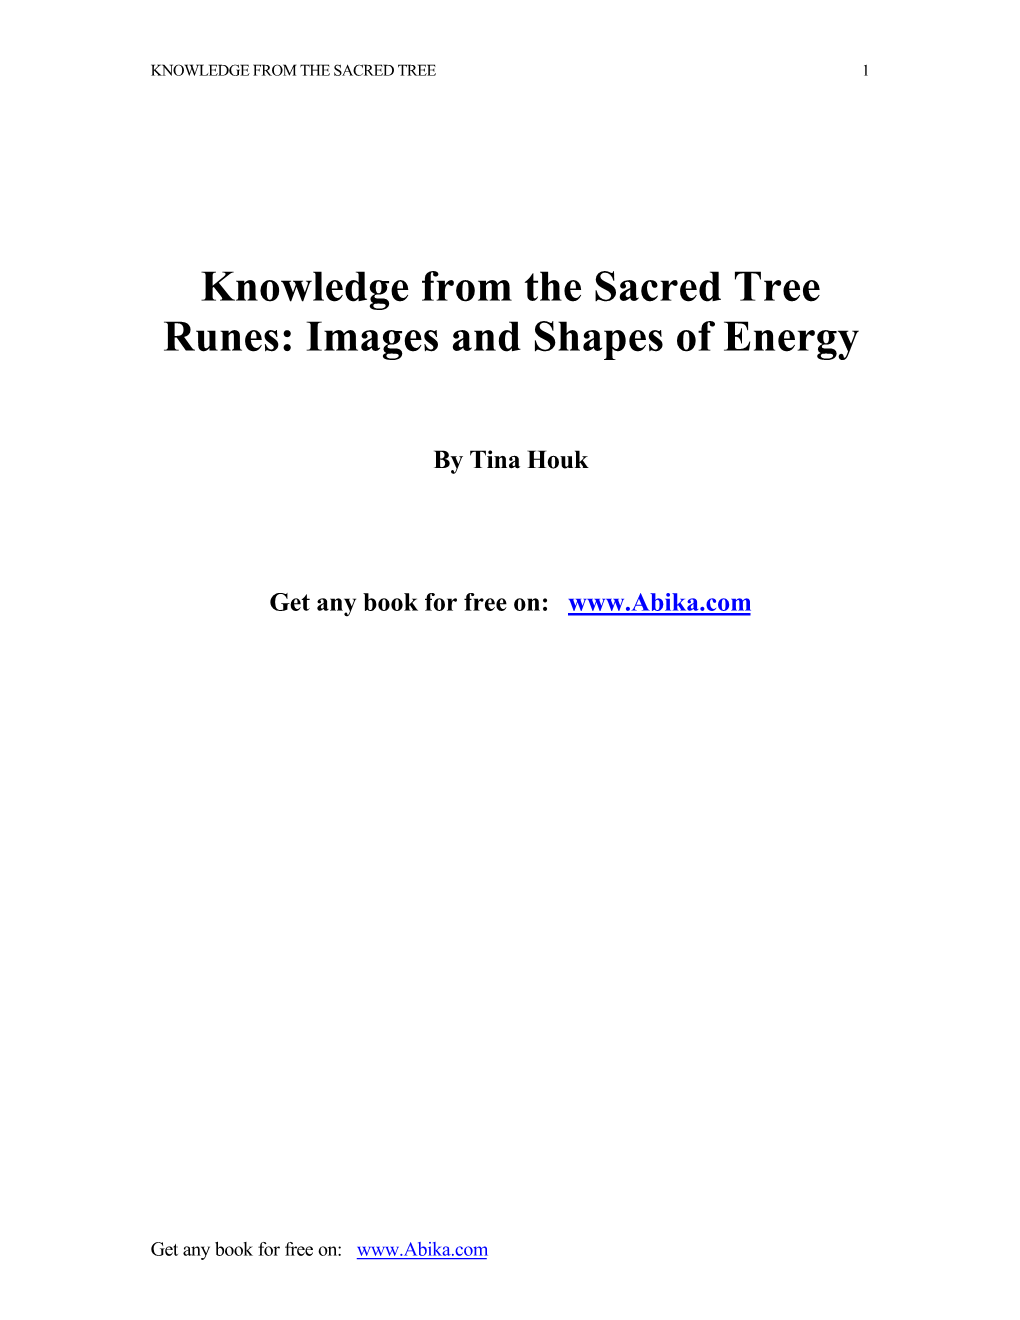 Knowledge from the Sacred Tree Runes: Images and Shapes of Energy